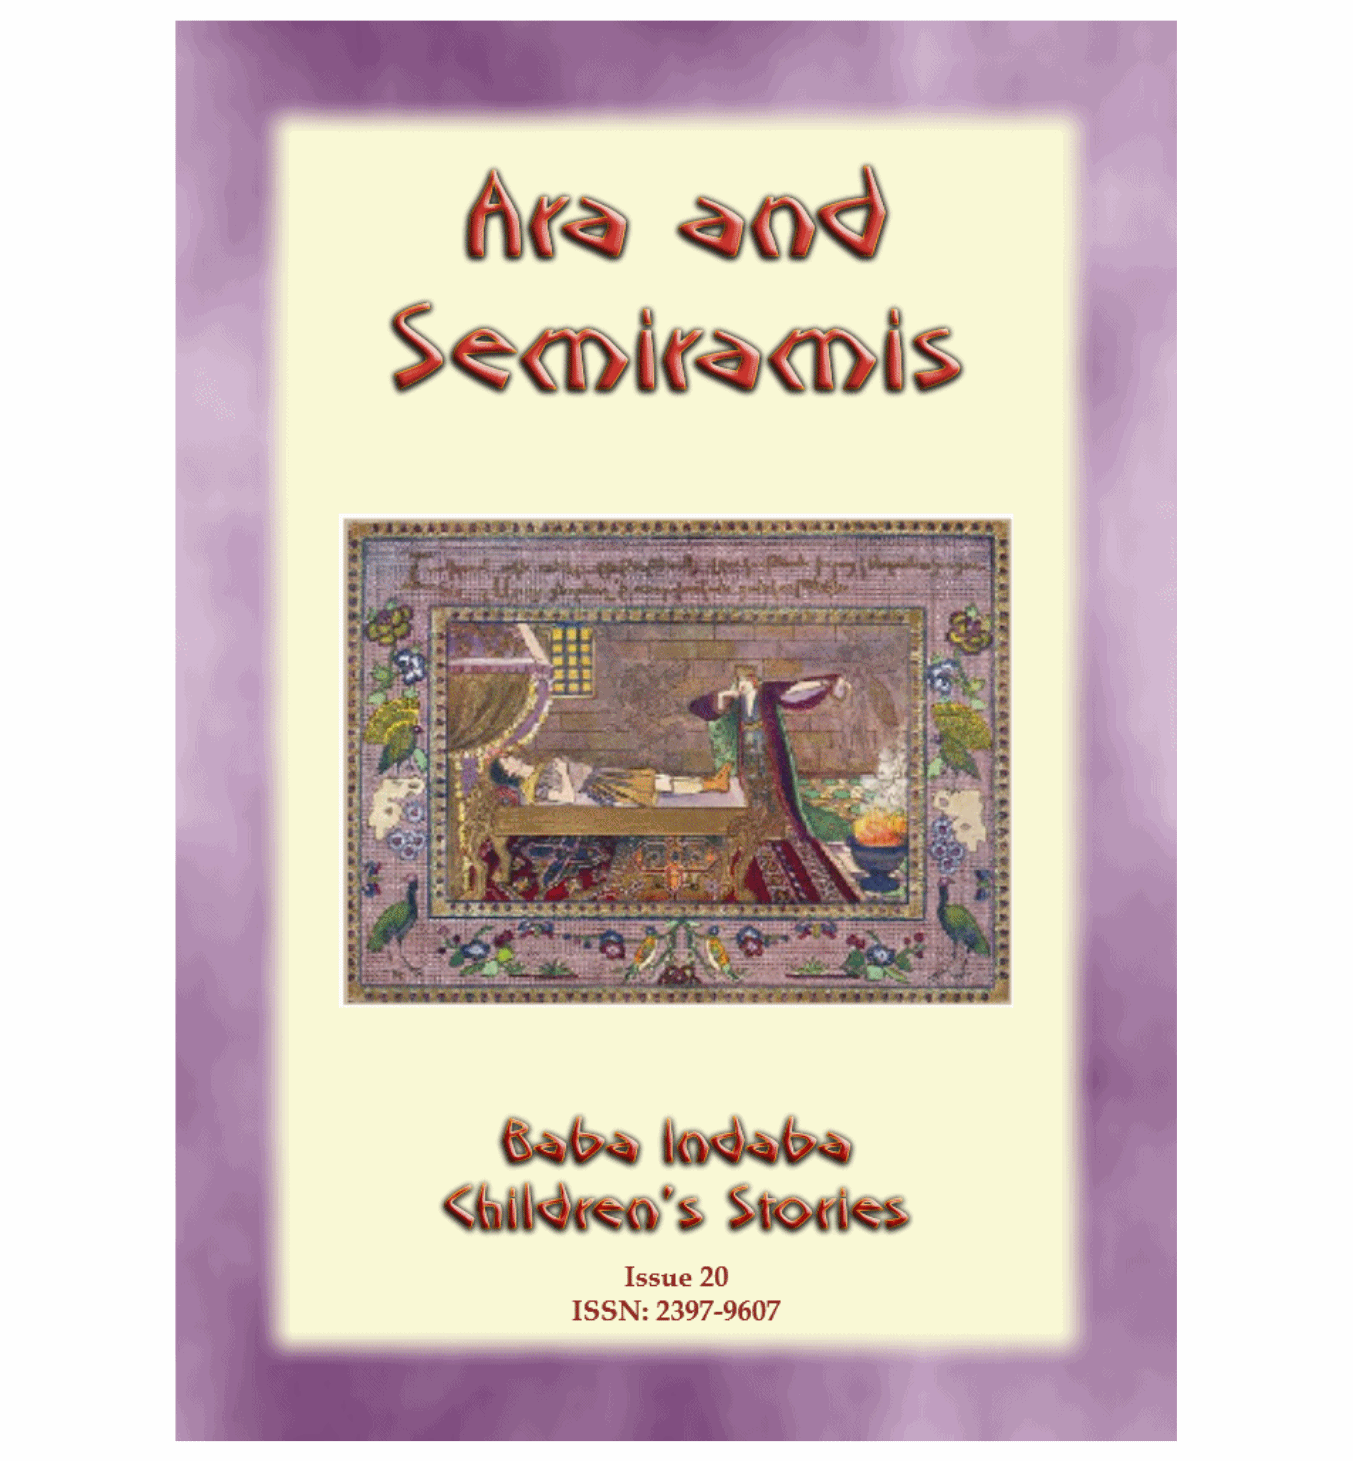 ARA AND SEMIRAMIS - an Ancient Armenian and Persian tale:: Baba Indaba Children's Stories - Issue 020 